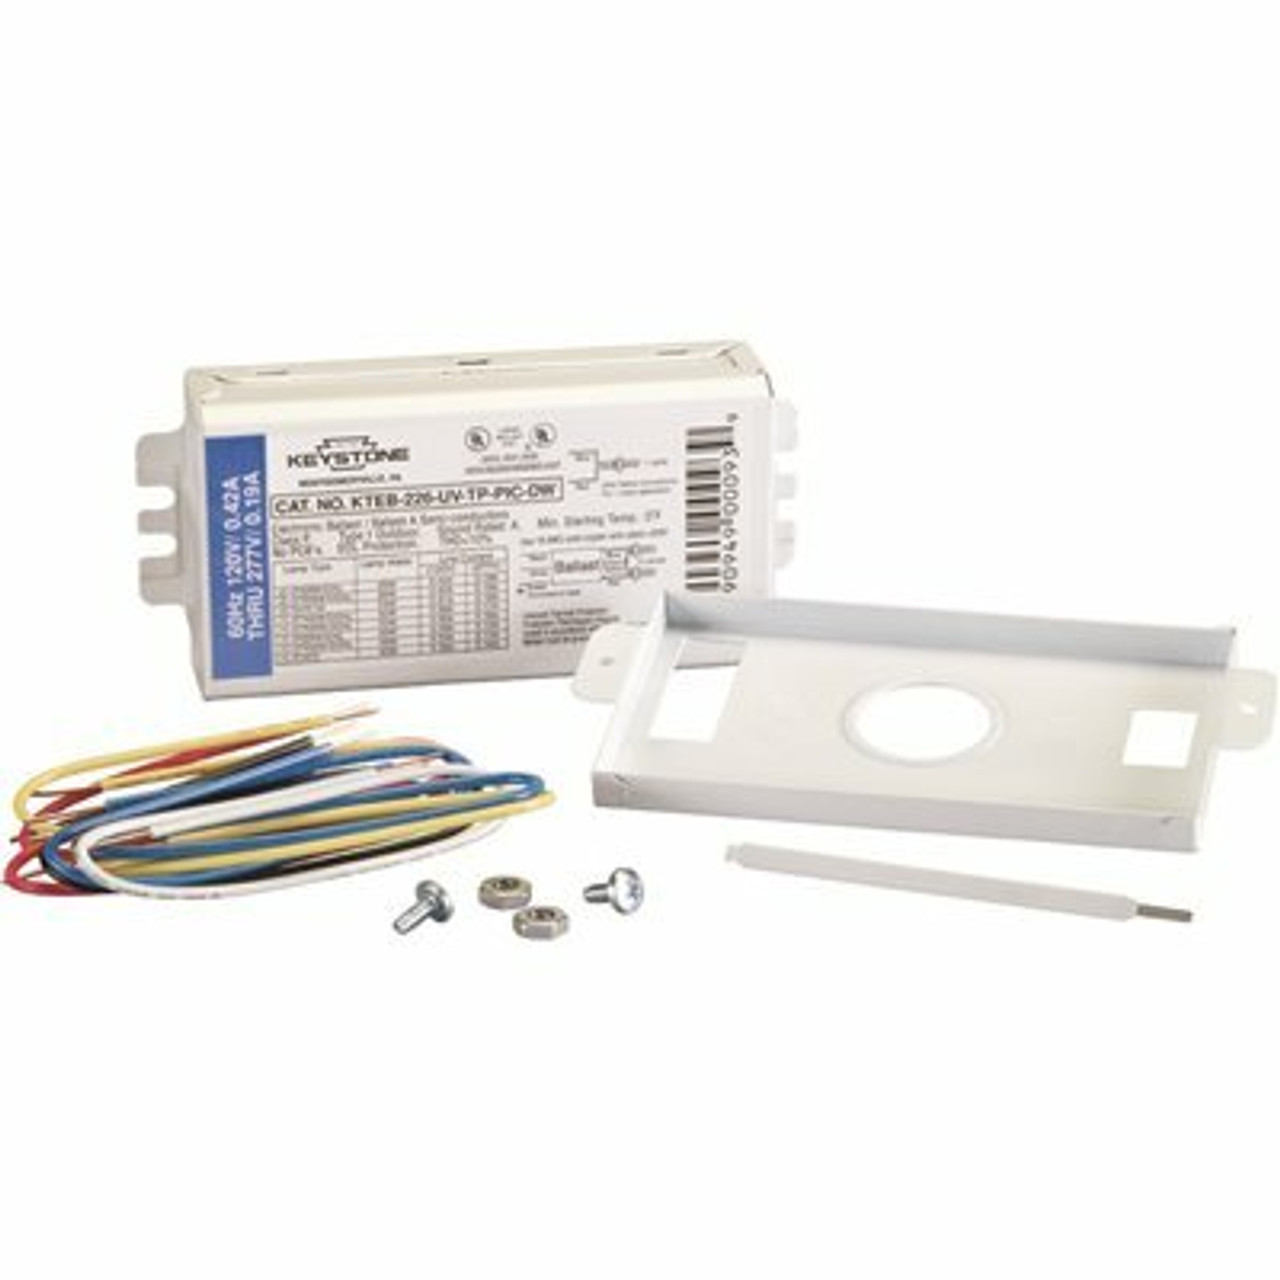 Keystone Technologies Keystone Technologies 26-Watt 1 Or 2-Lamp Cfl Rapid Start Electronic Fluorescent Replacement Ballast